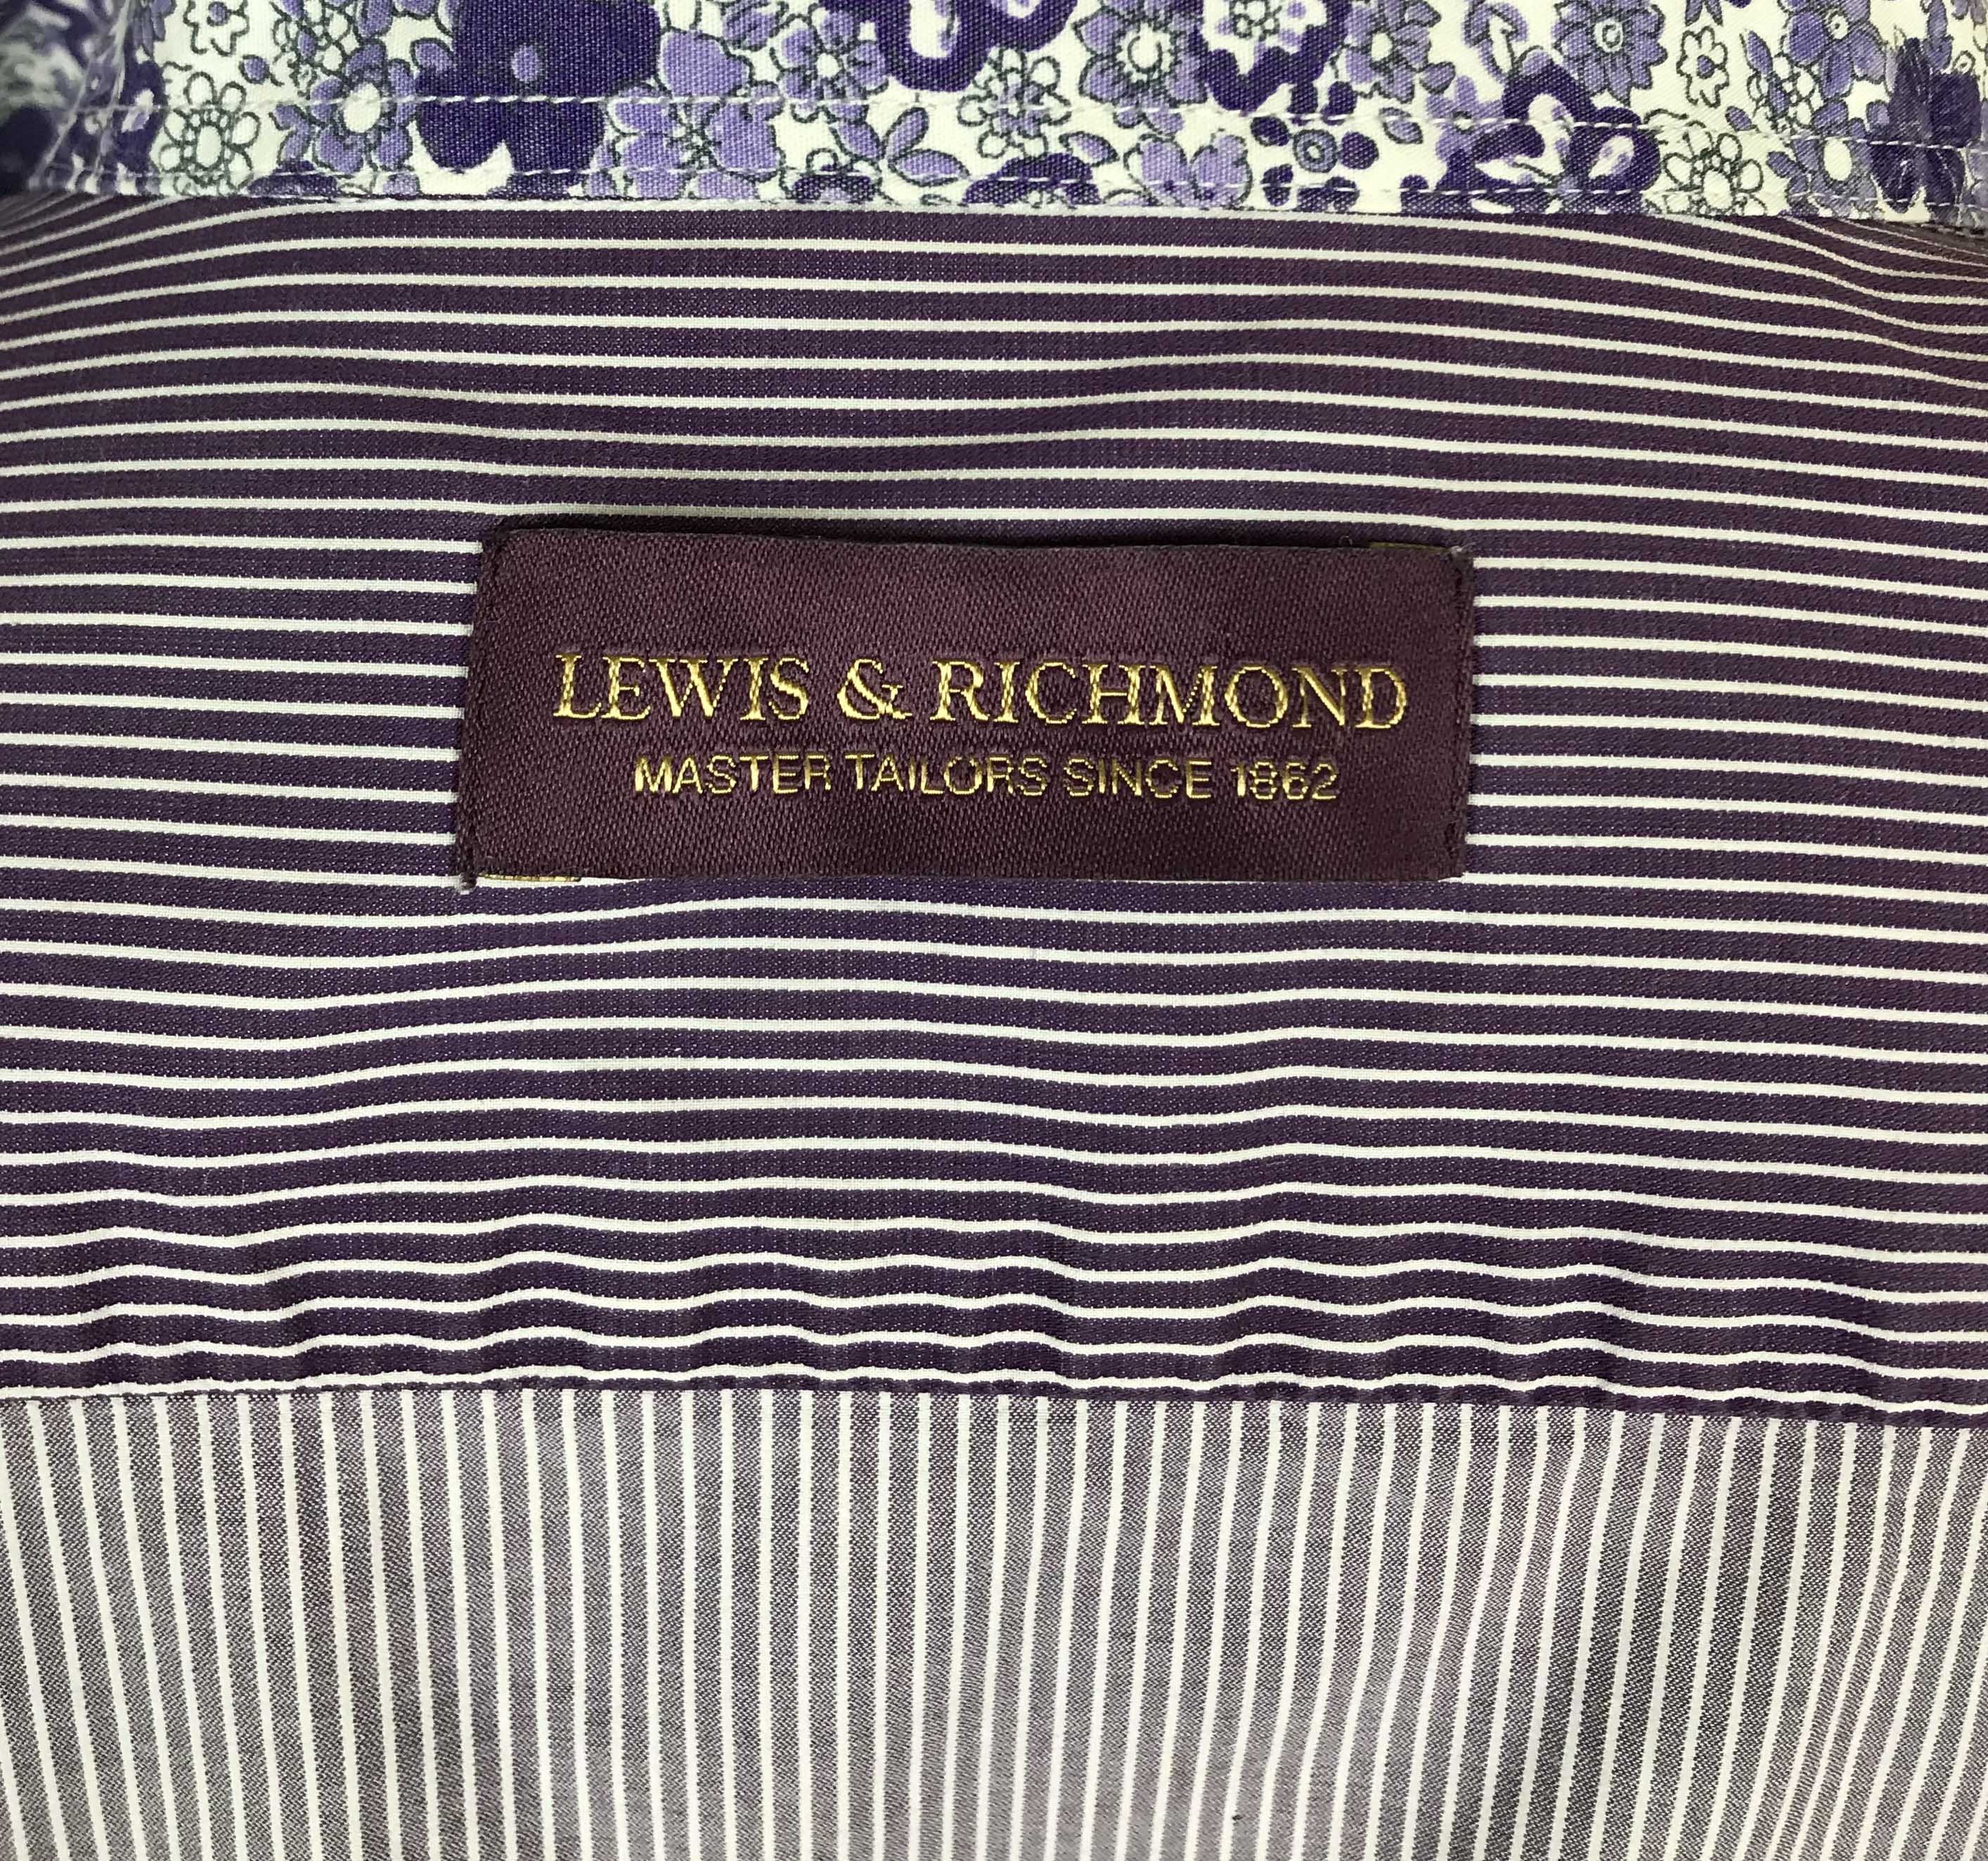 Plus Size Men's Stripped Shirt by LEWIS & RICHMOND Casual - Etsy